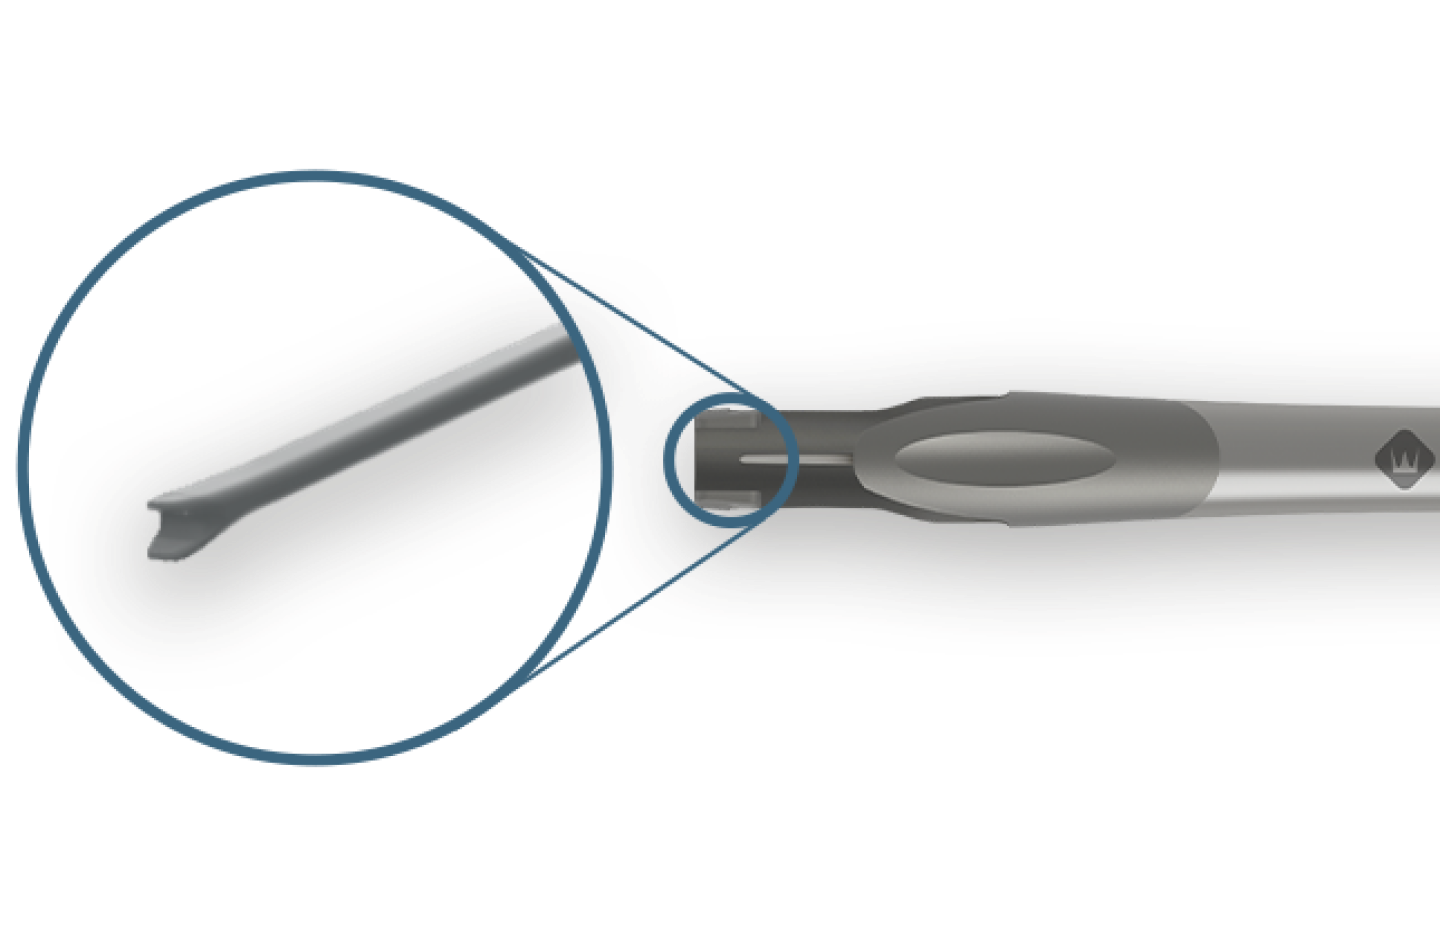 Clareon Monarch IV Handpiece sits horizontally. A blue circle is placed on the device to draw focus to its plunger tip.